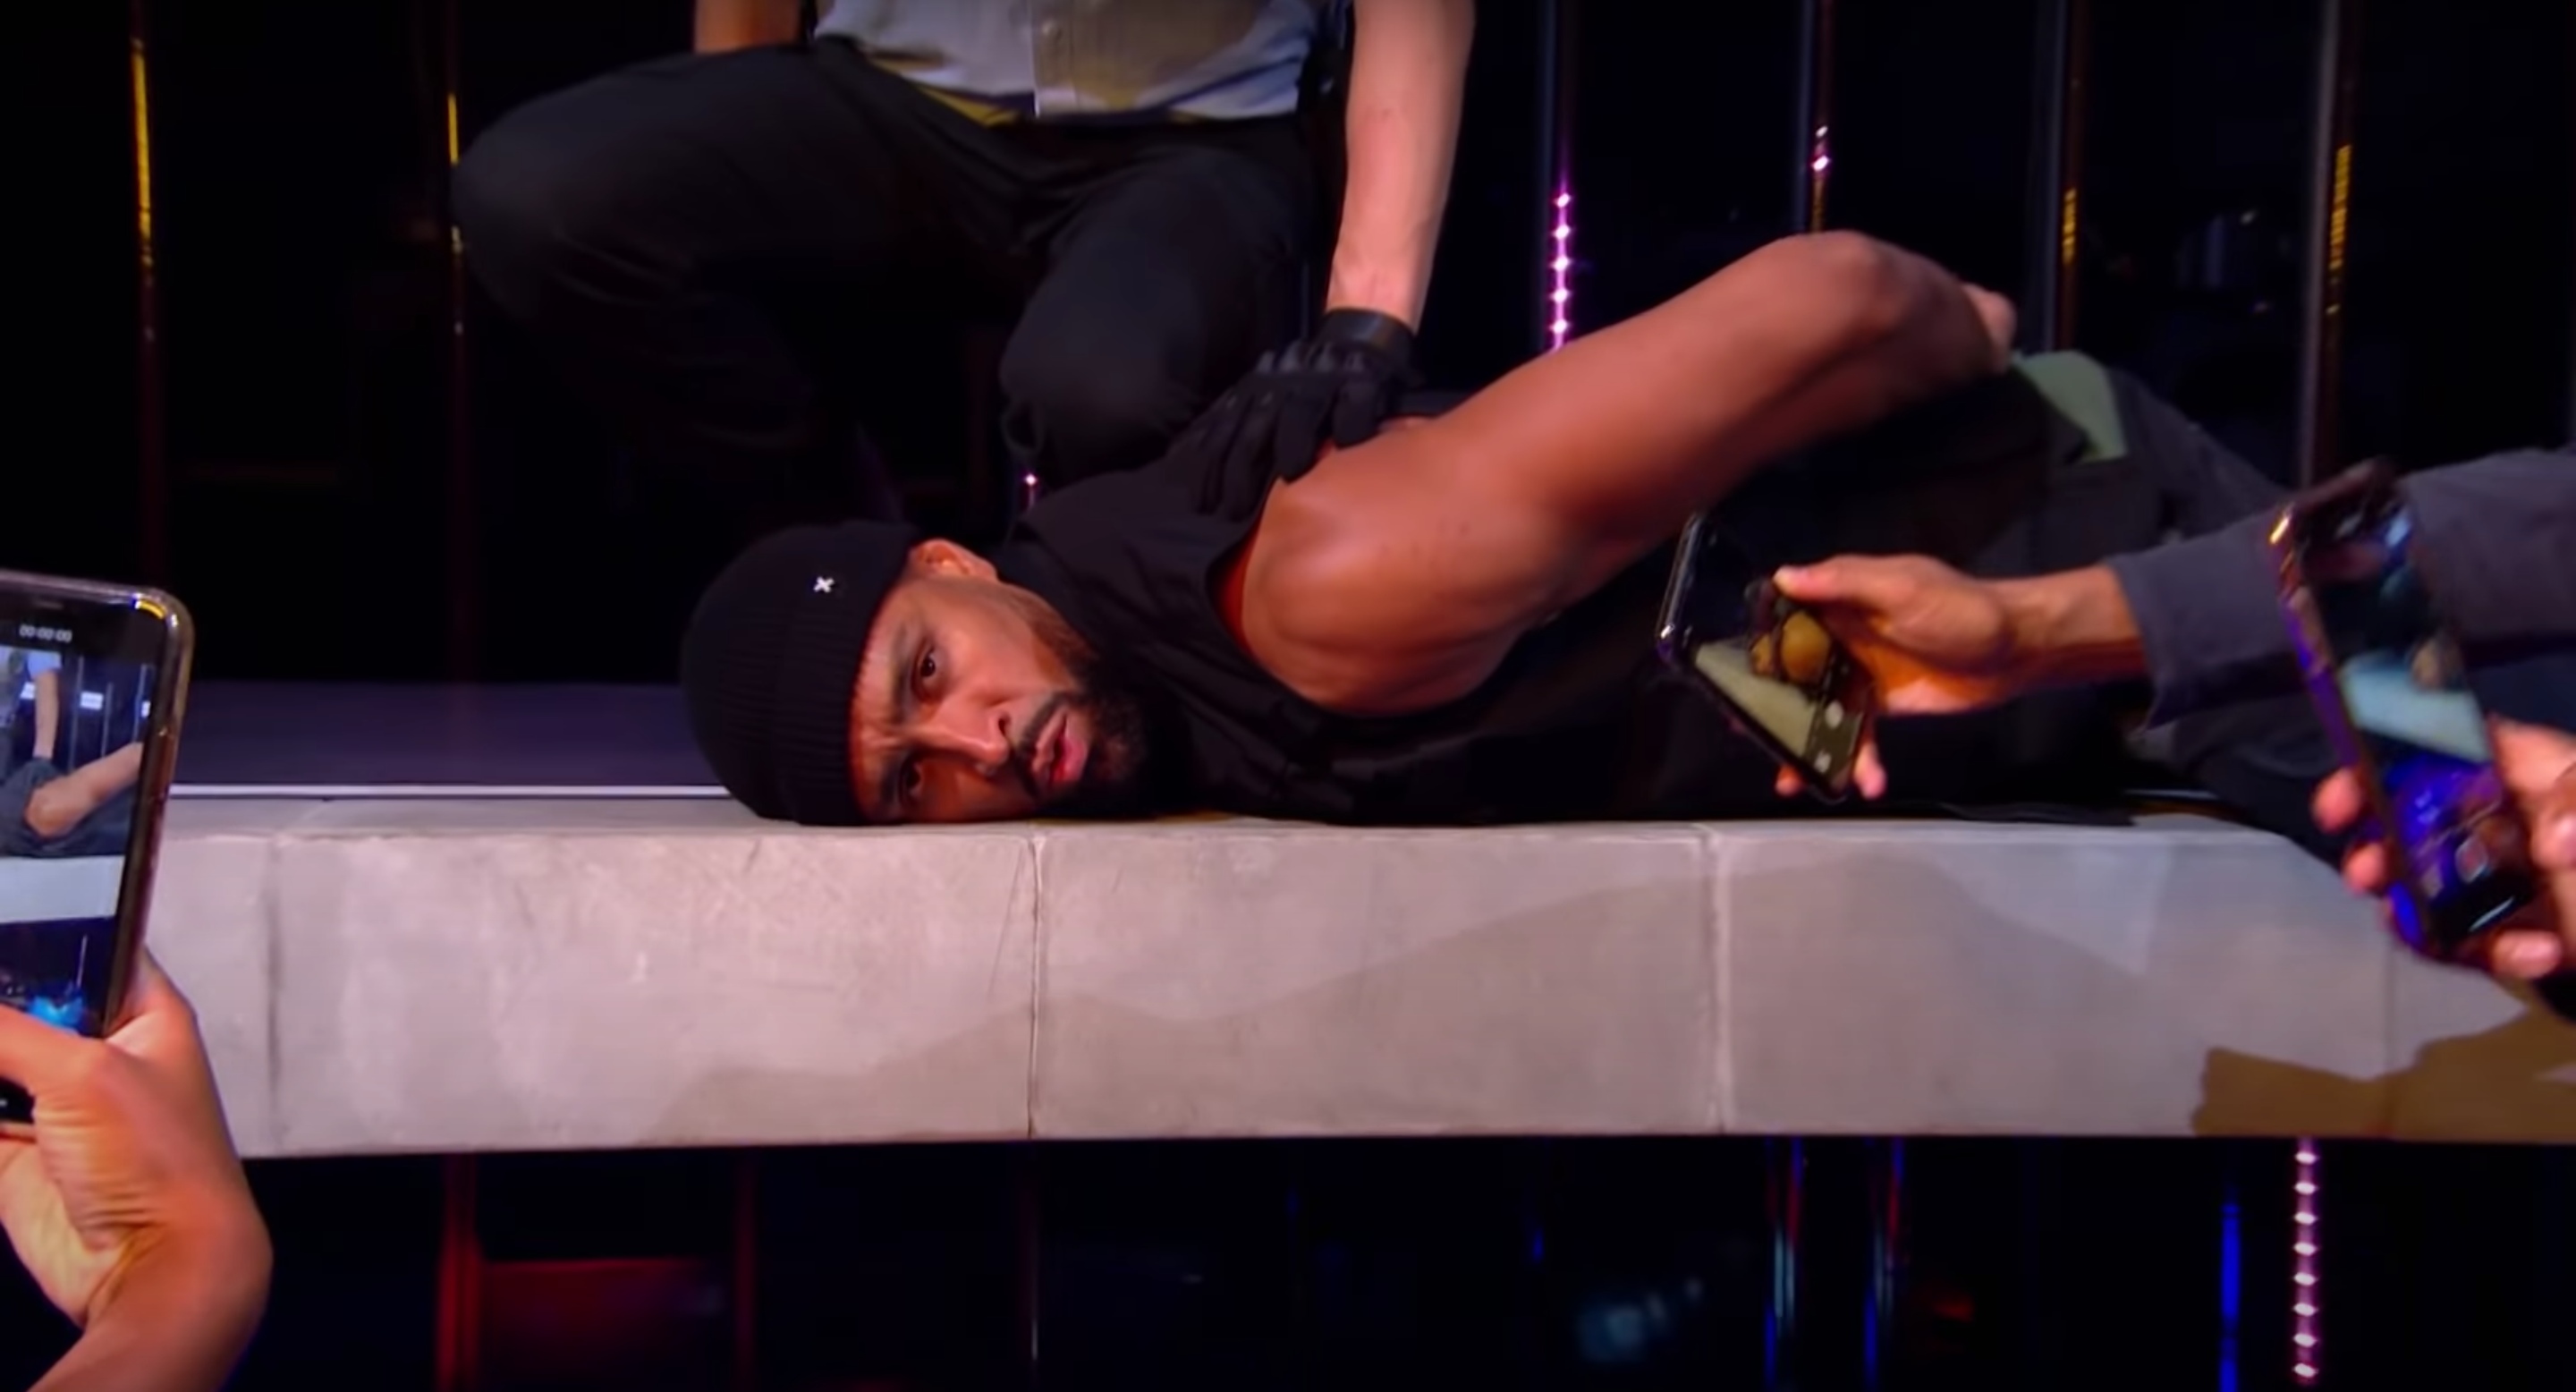 Diversity leader Ashley Banjo was seen being pinned down by police